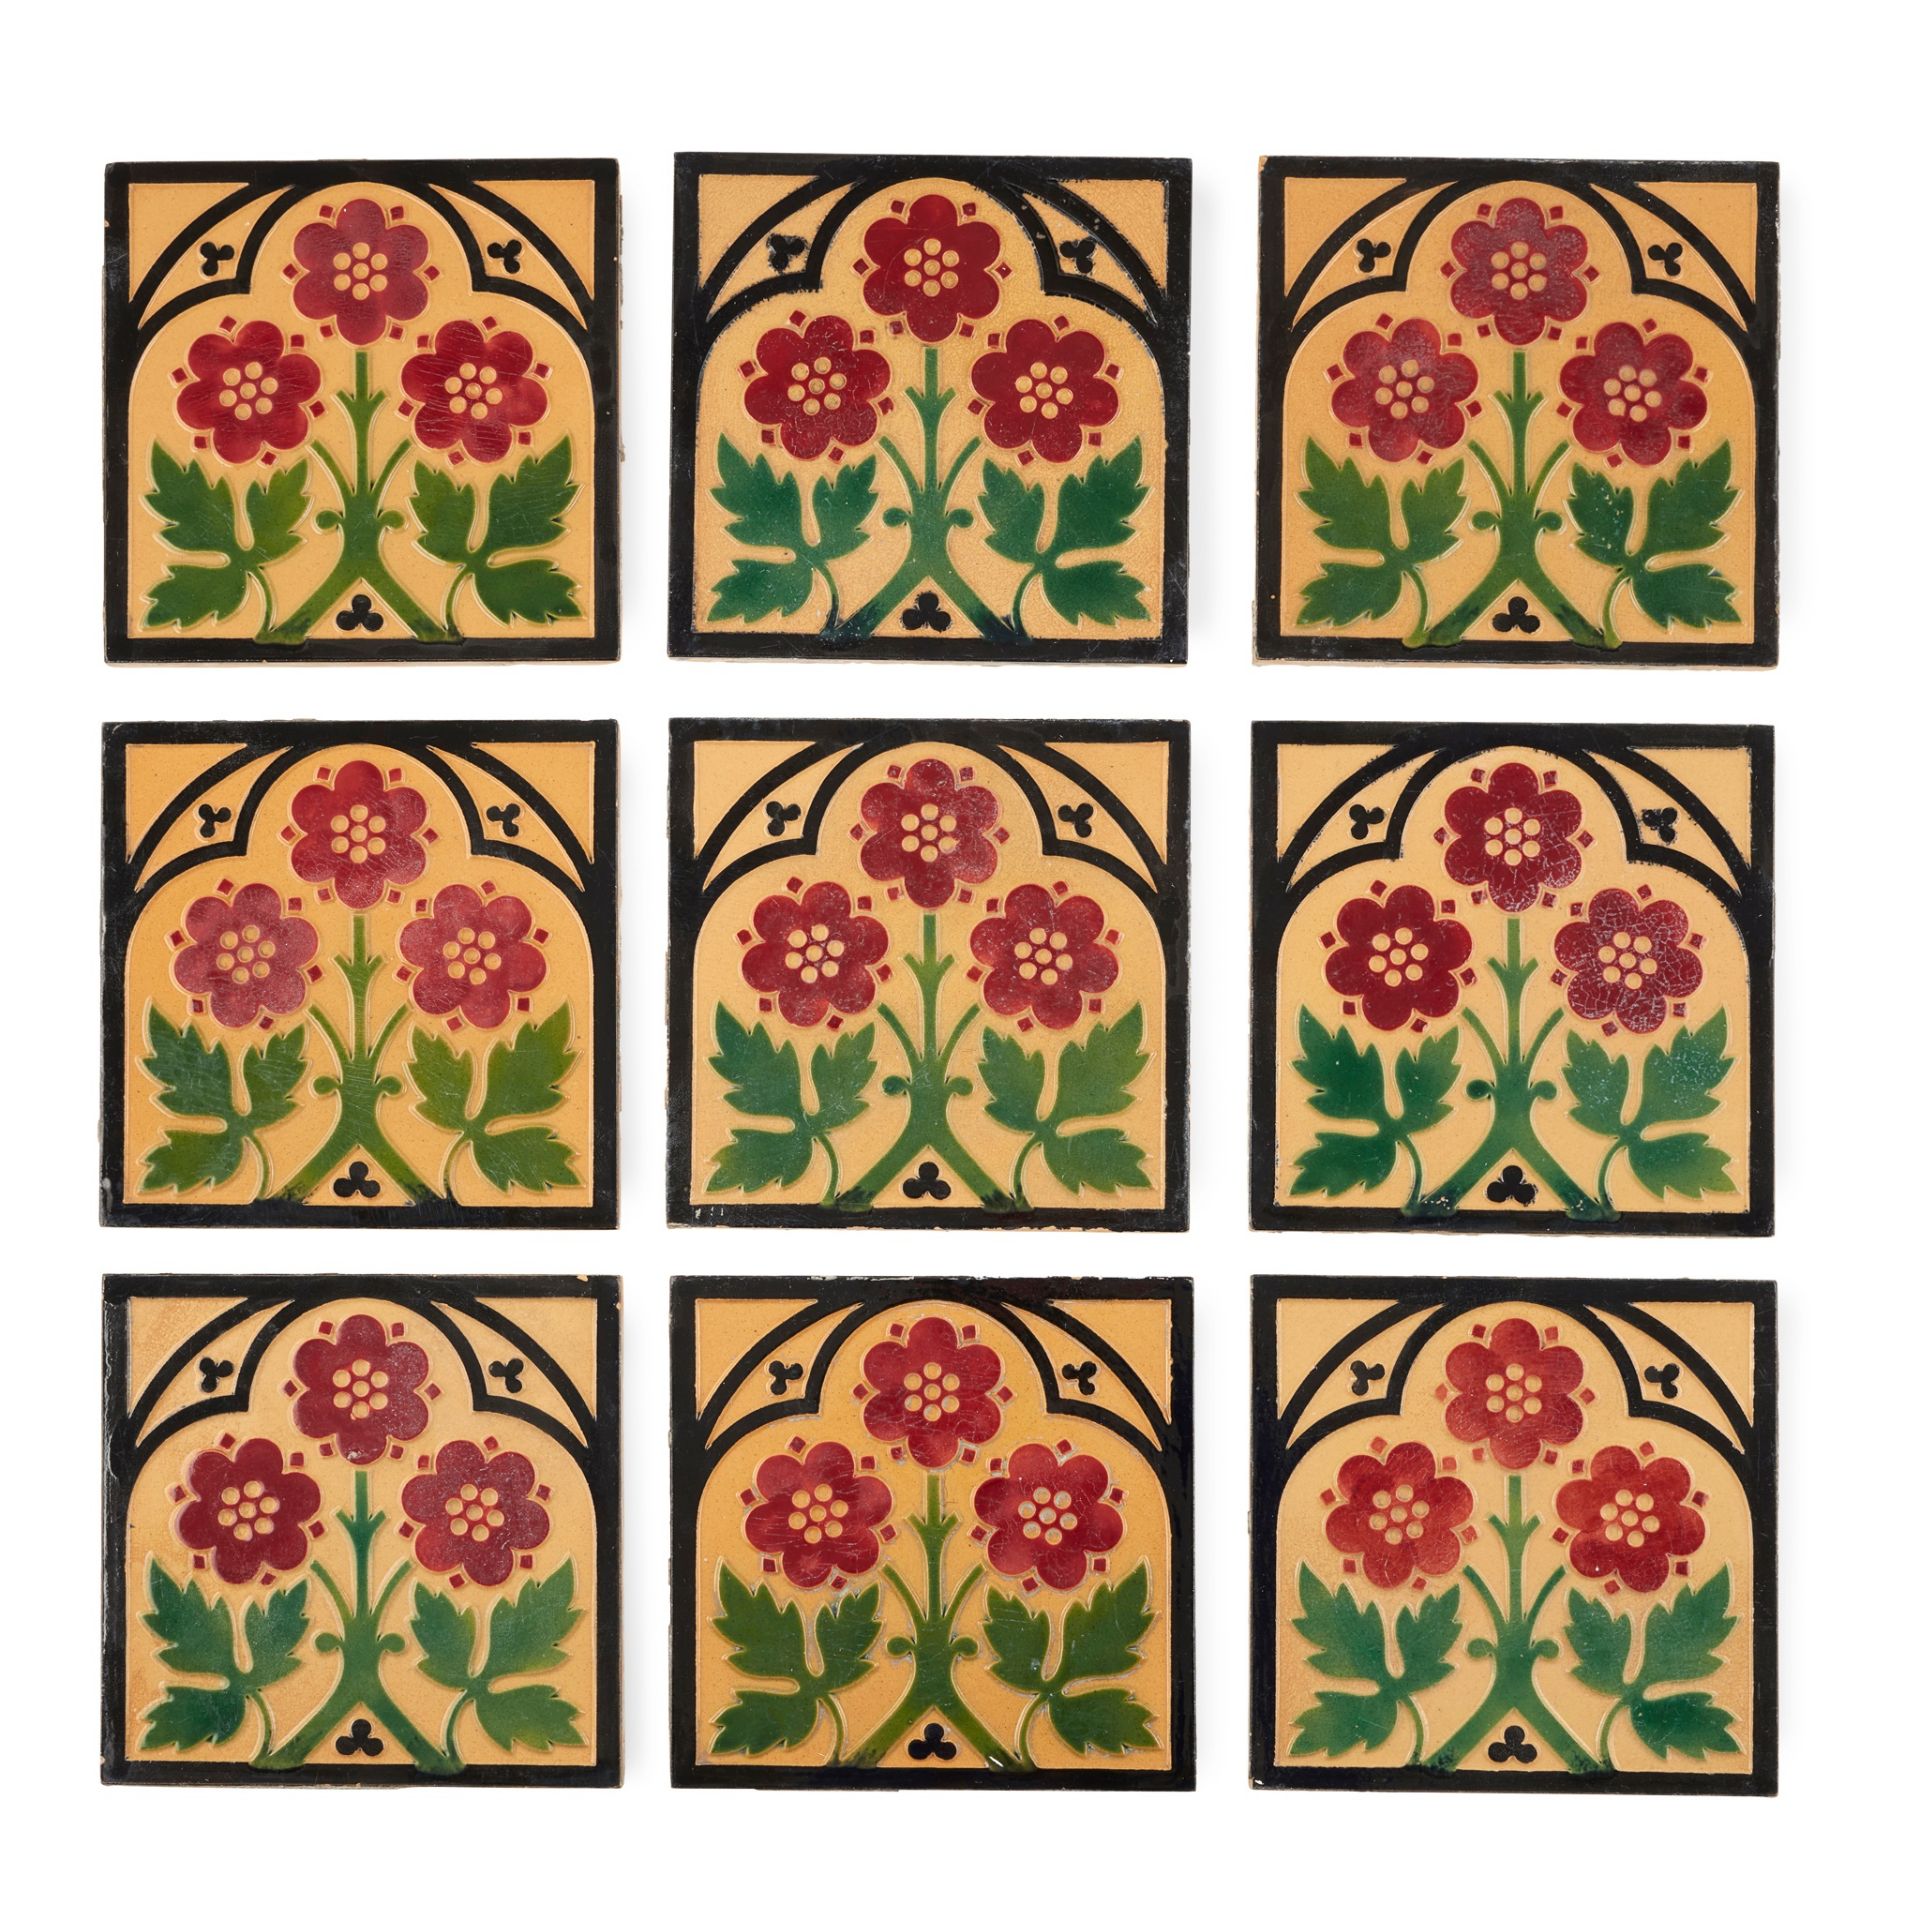 A.W.N. PUGIN (1812-1852) FOR MINTON & CO. GROUP OF NINE RELIEF TILES, CIRCA 1860